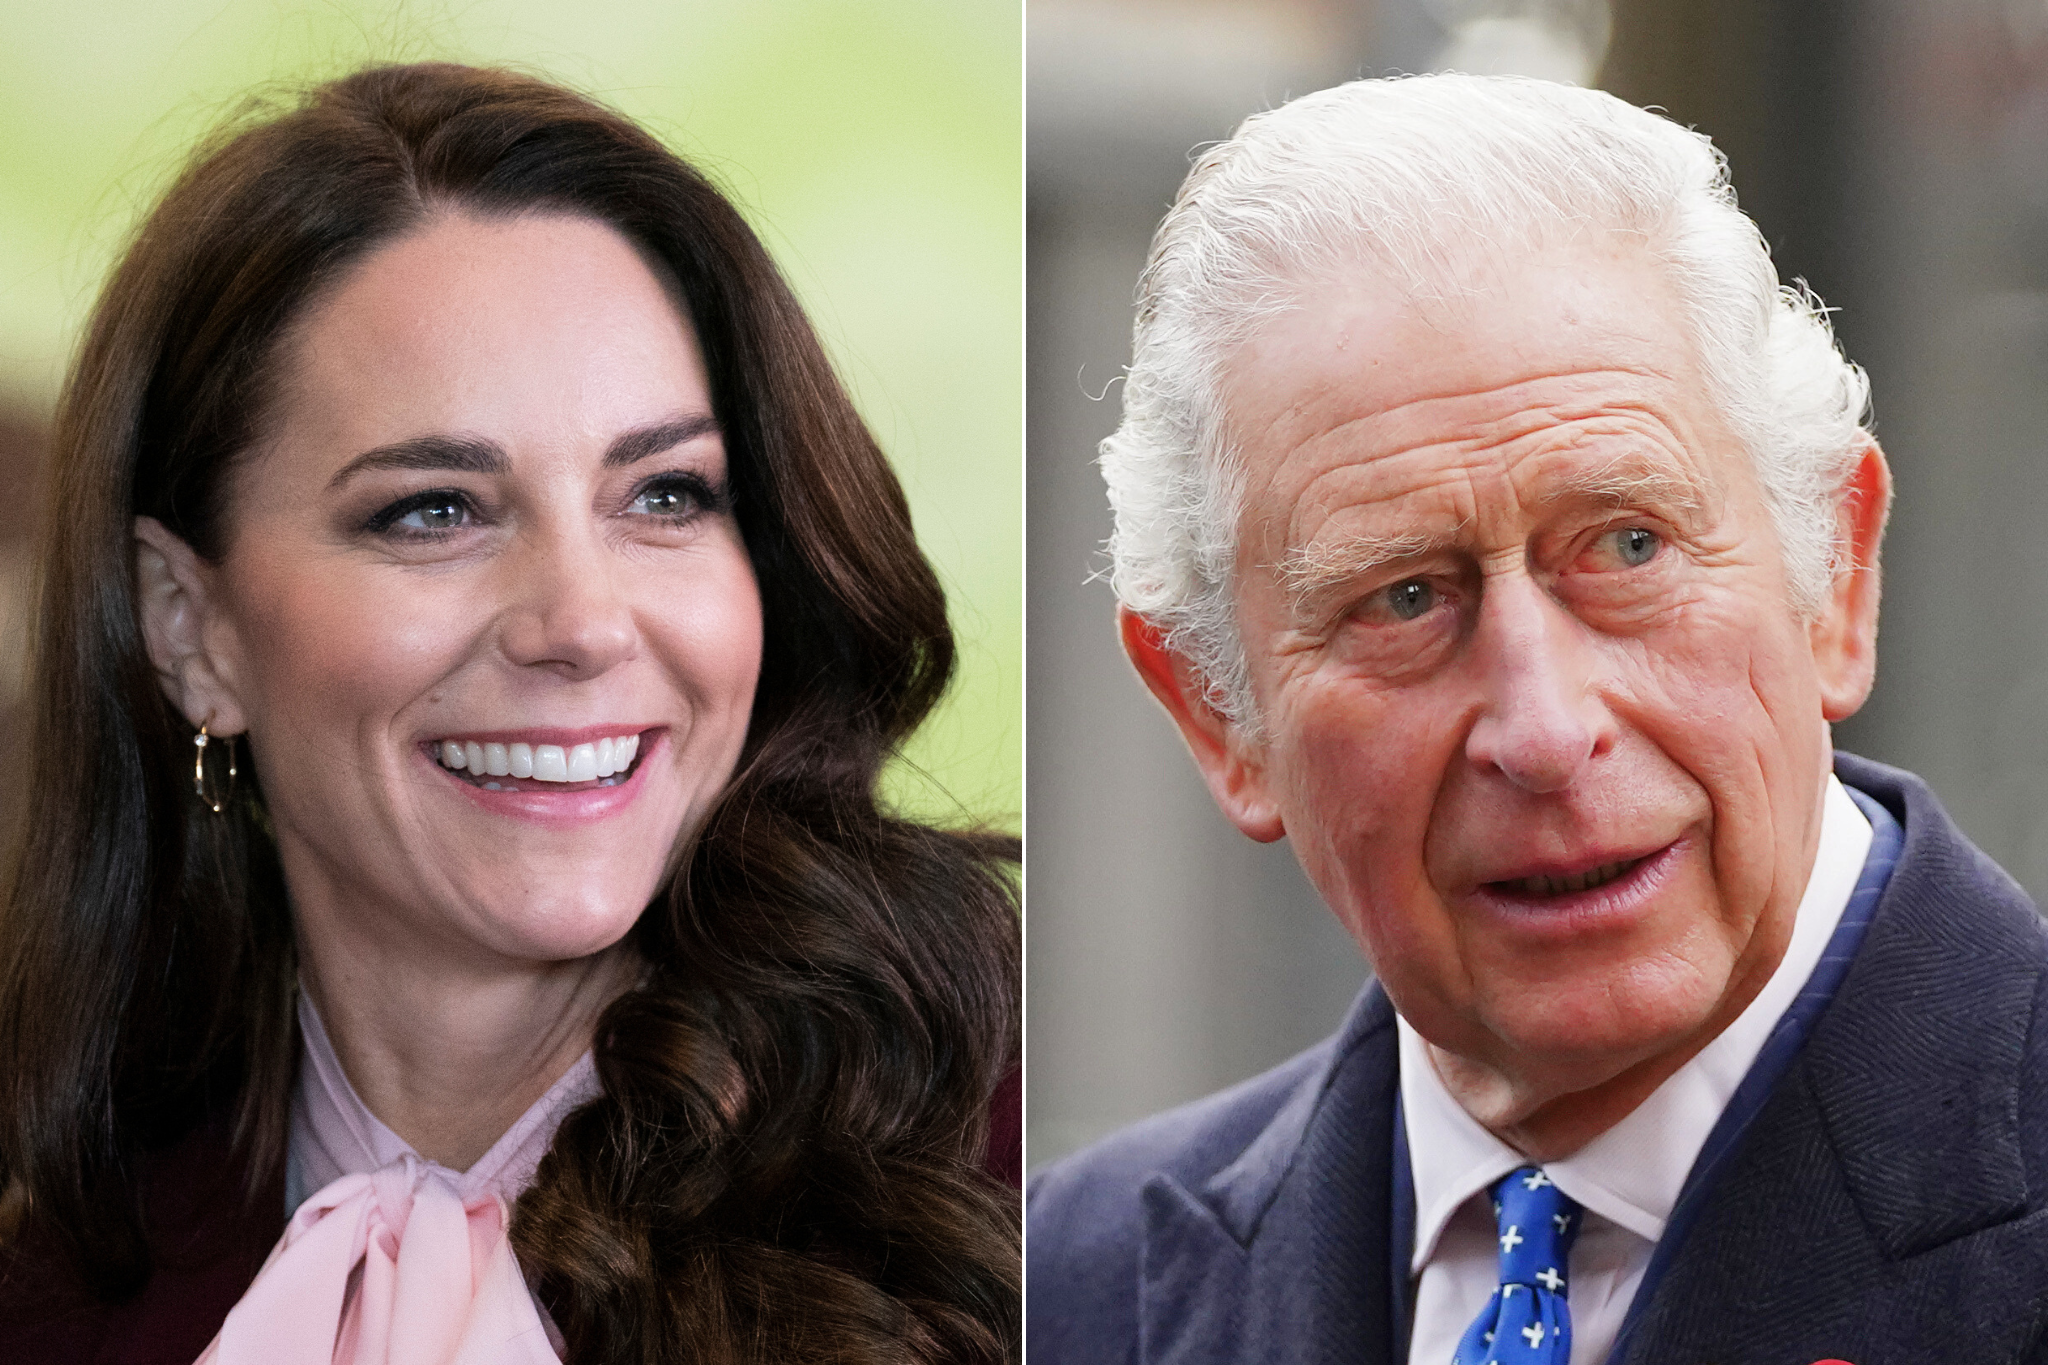 King Charles and Kate Middleton will appear together in the Trooping the Color parade